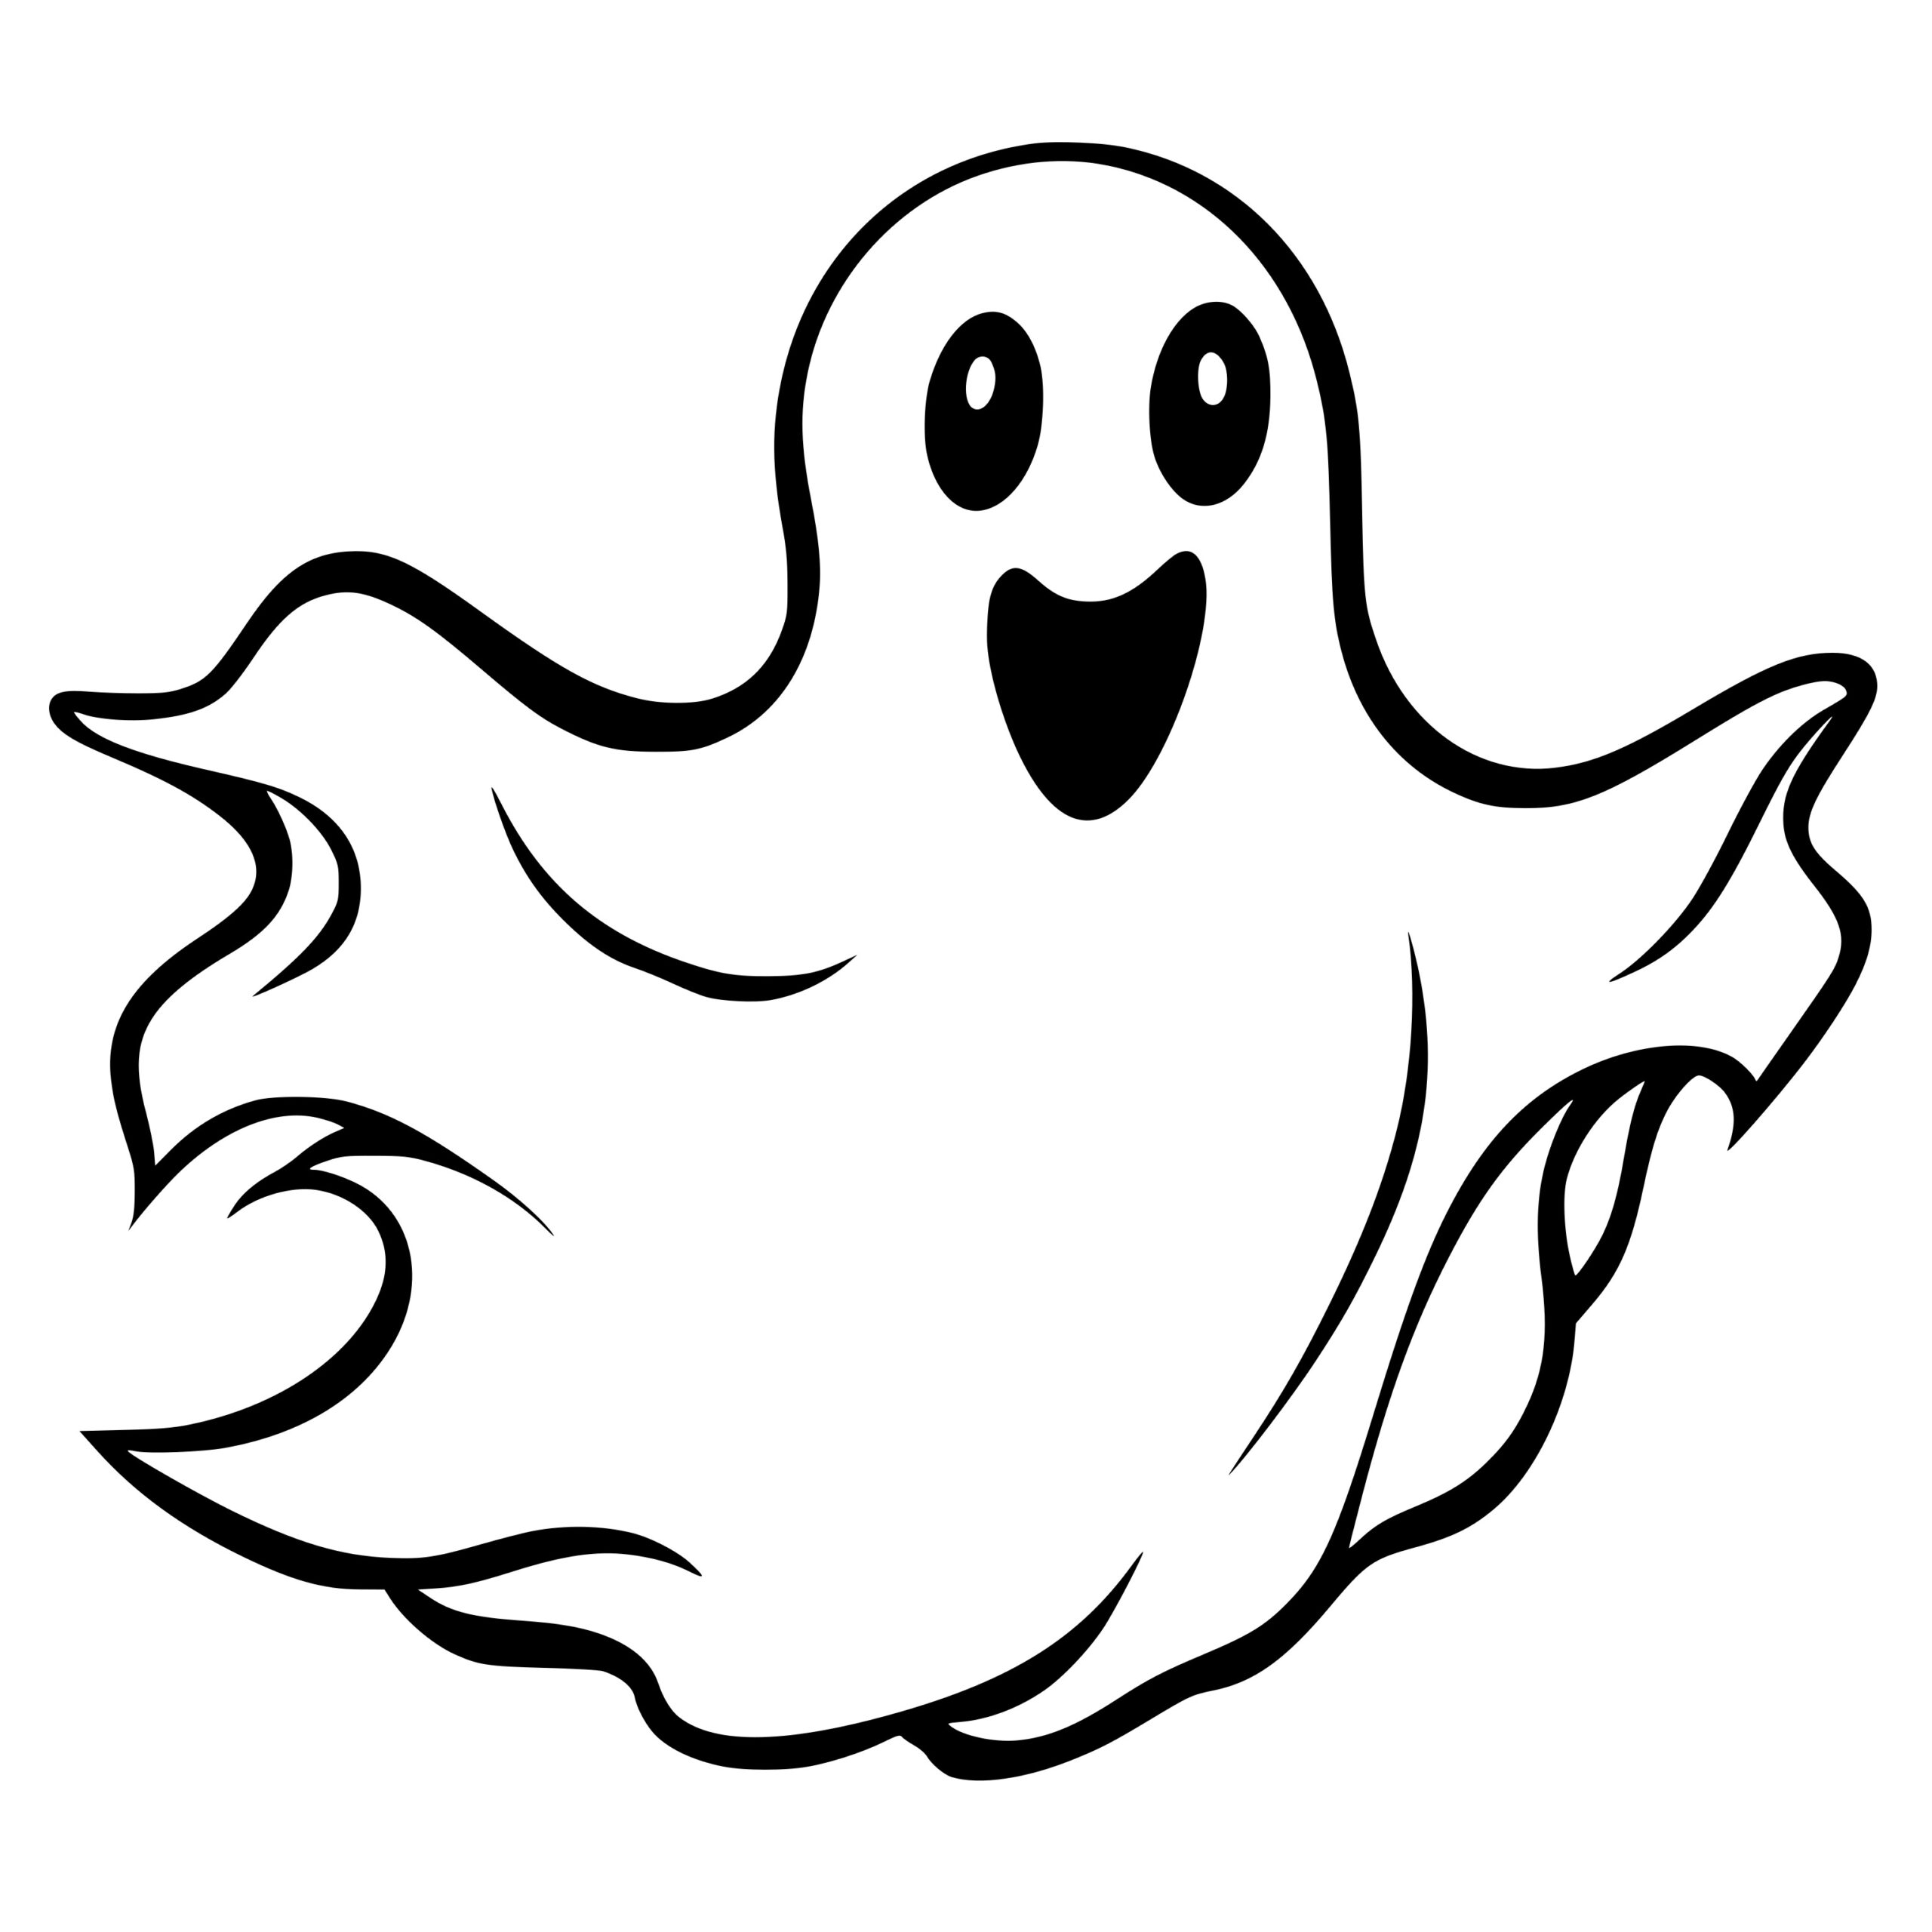 Ghostly Smile: SVG, PNG, DXF Image Files for Cricut, Silhouette, Laser ...